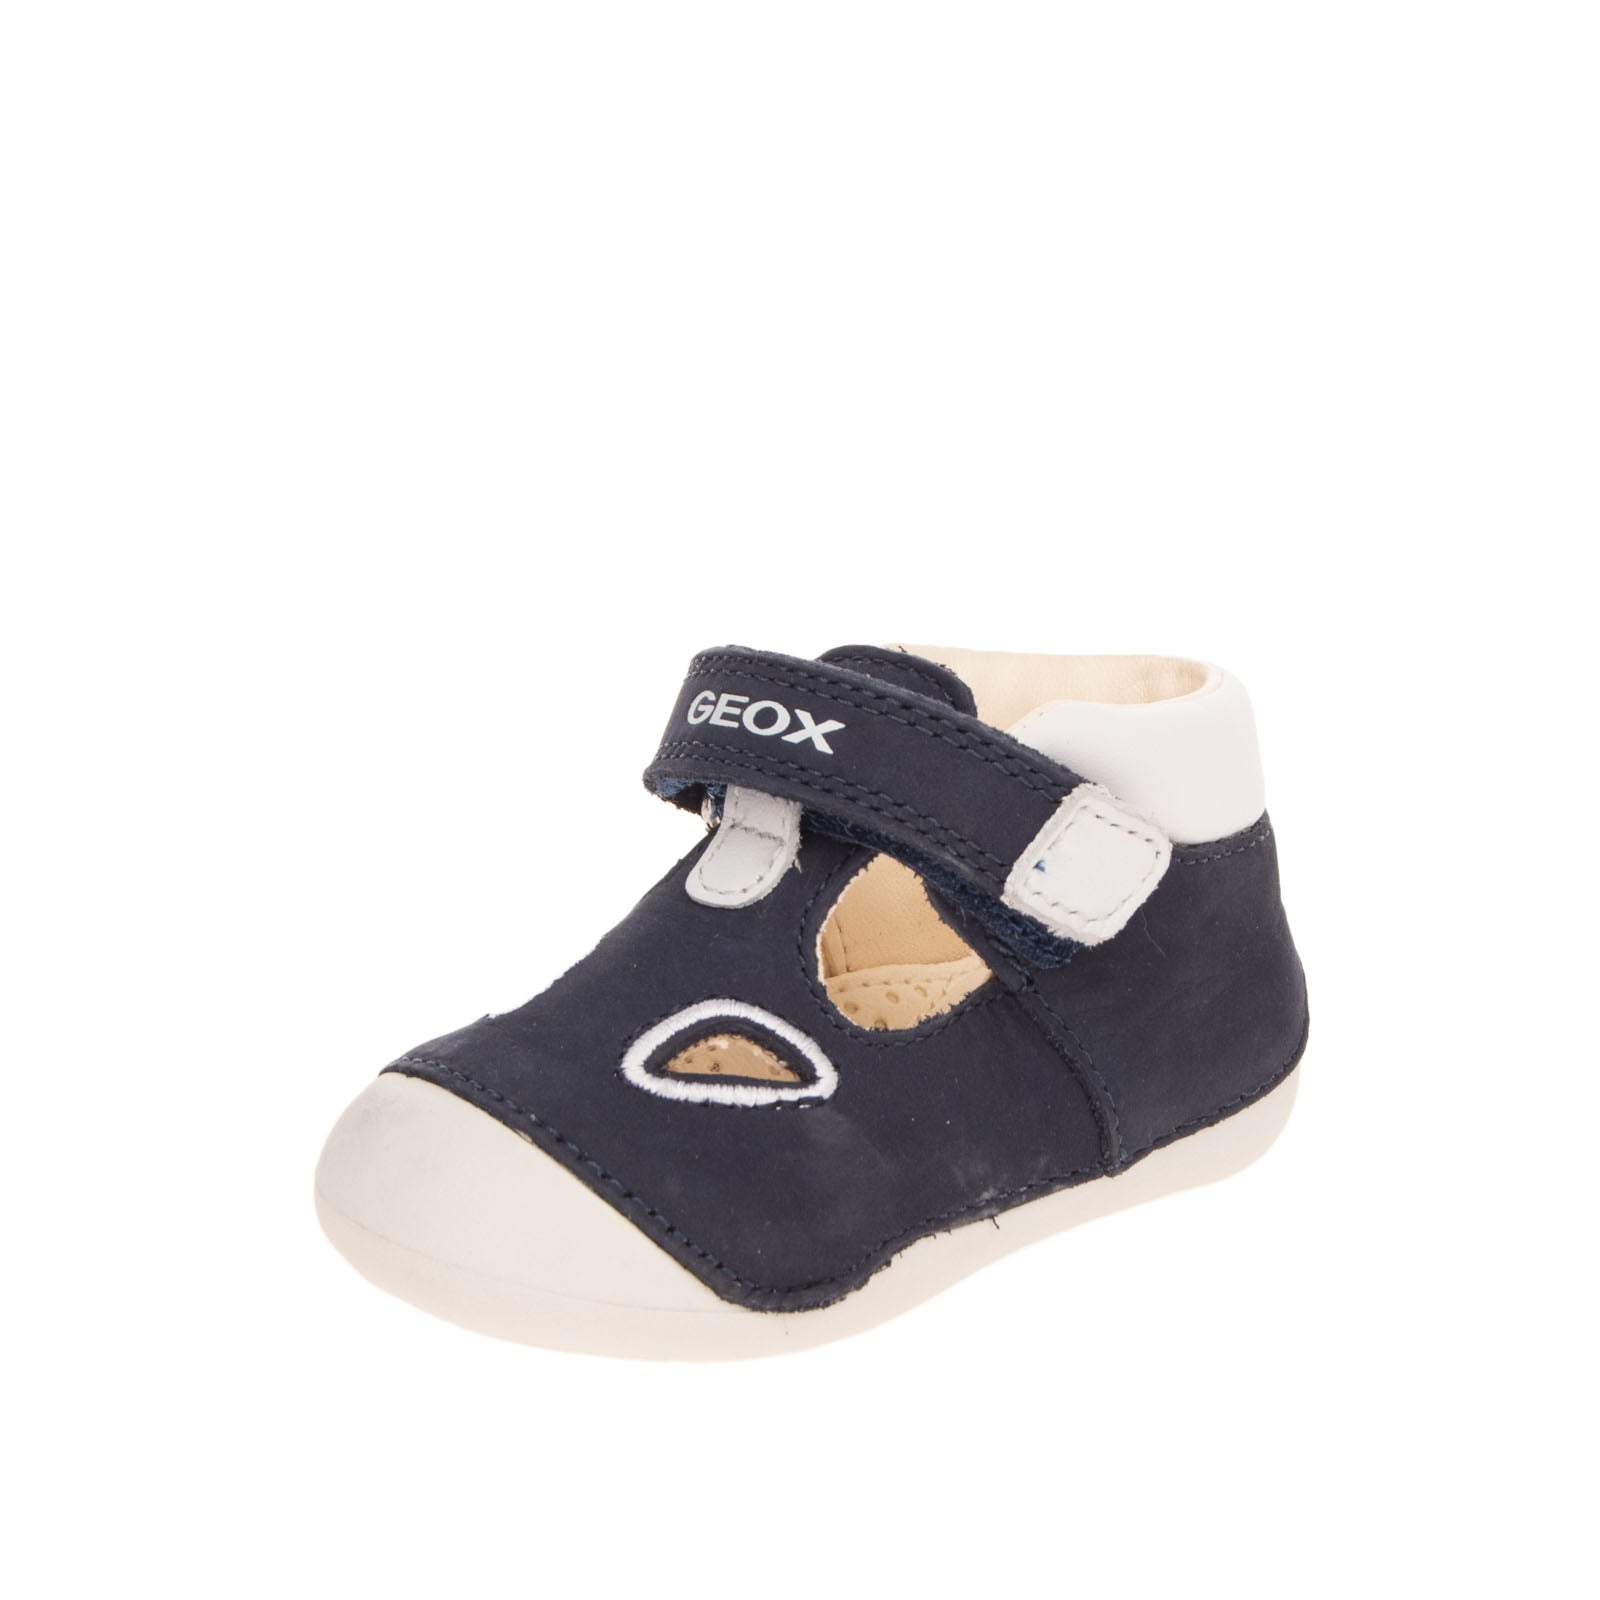 GEOX RESPIRA Baby Leather T-Bar Shoes Size 18 UK 2.5 US 3 Softly Cushioned Logo gallery main photo